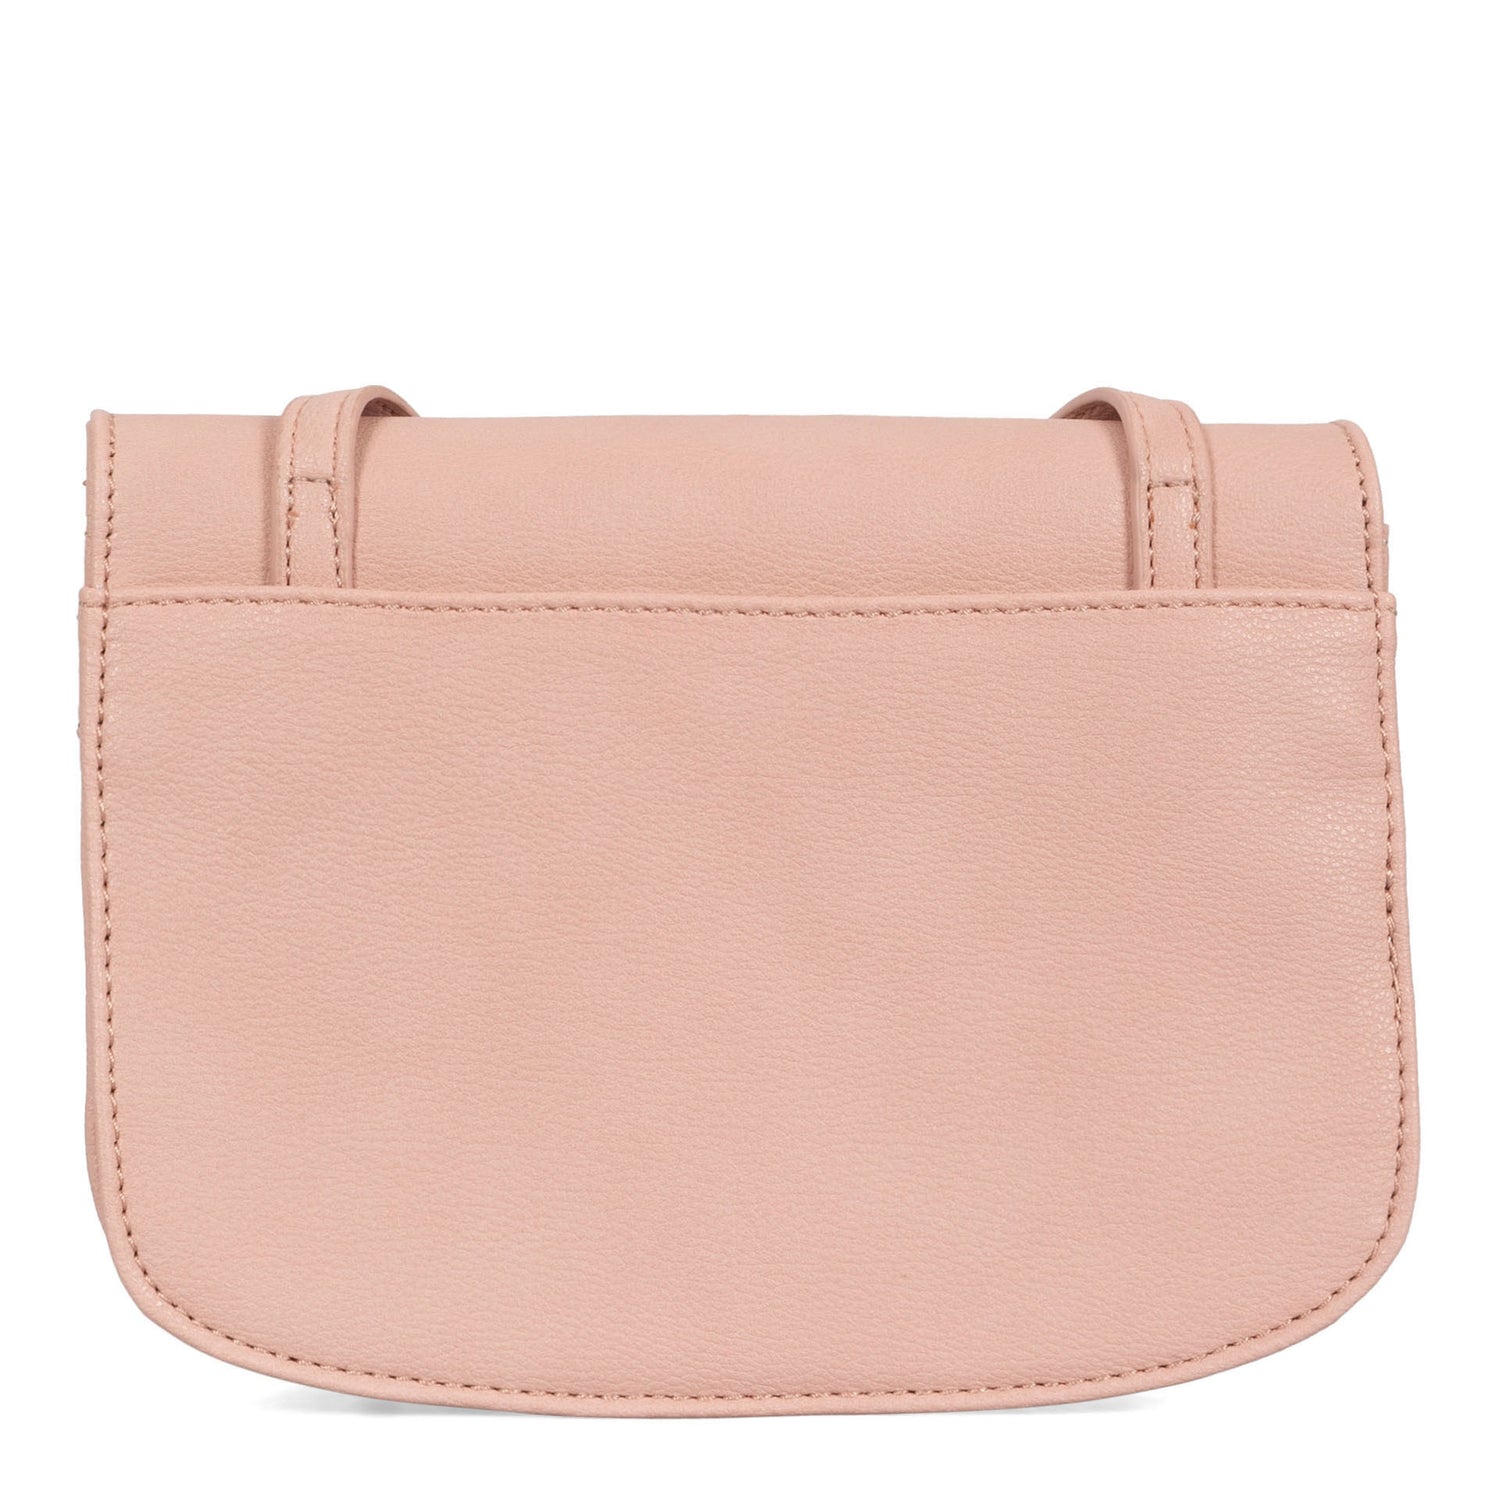 Backside of a pink crossbody bag for women called Organizers on a white background, showcasing its interior and smooth texture - bentley